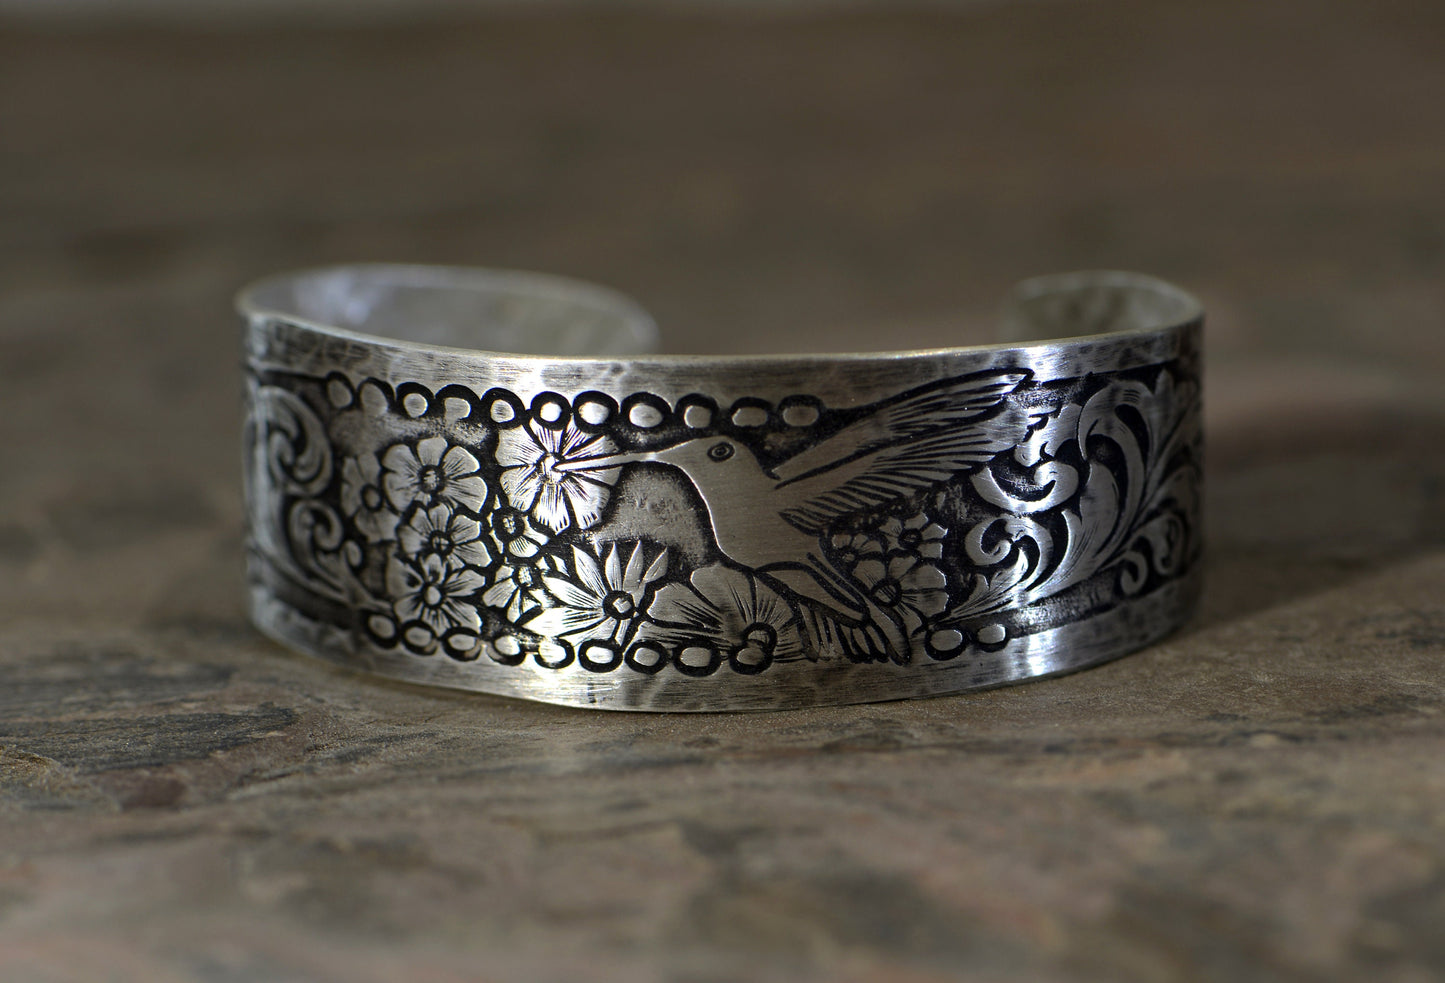 Hummingbird and flowers on a sterling silver cuff bracelet